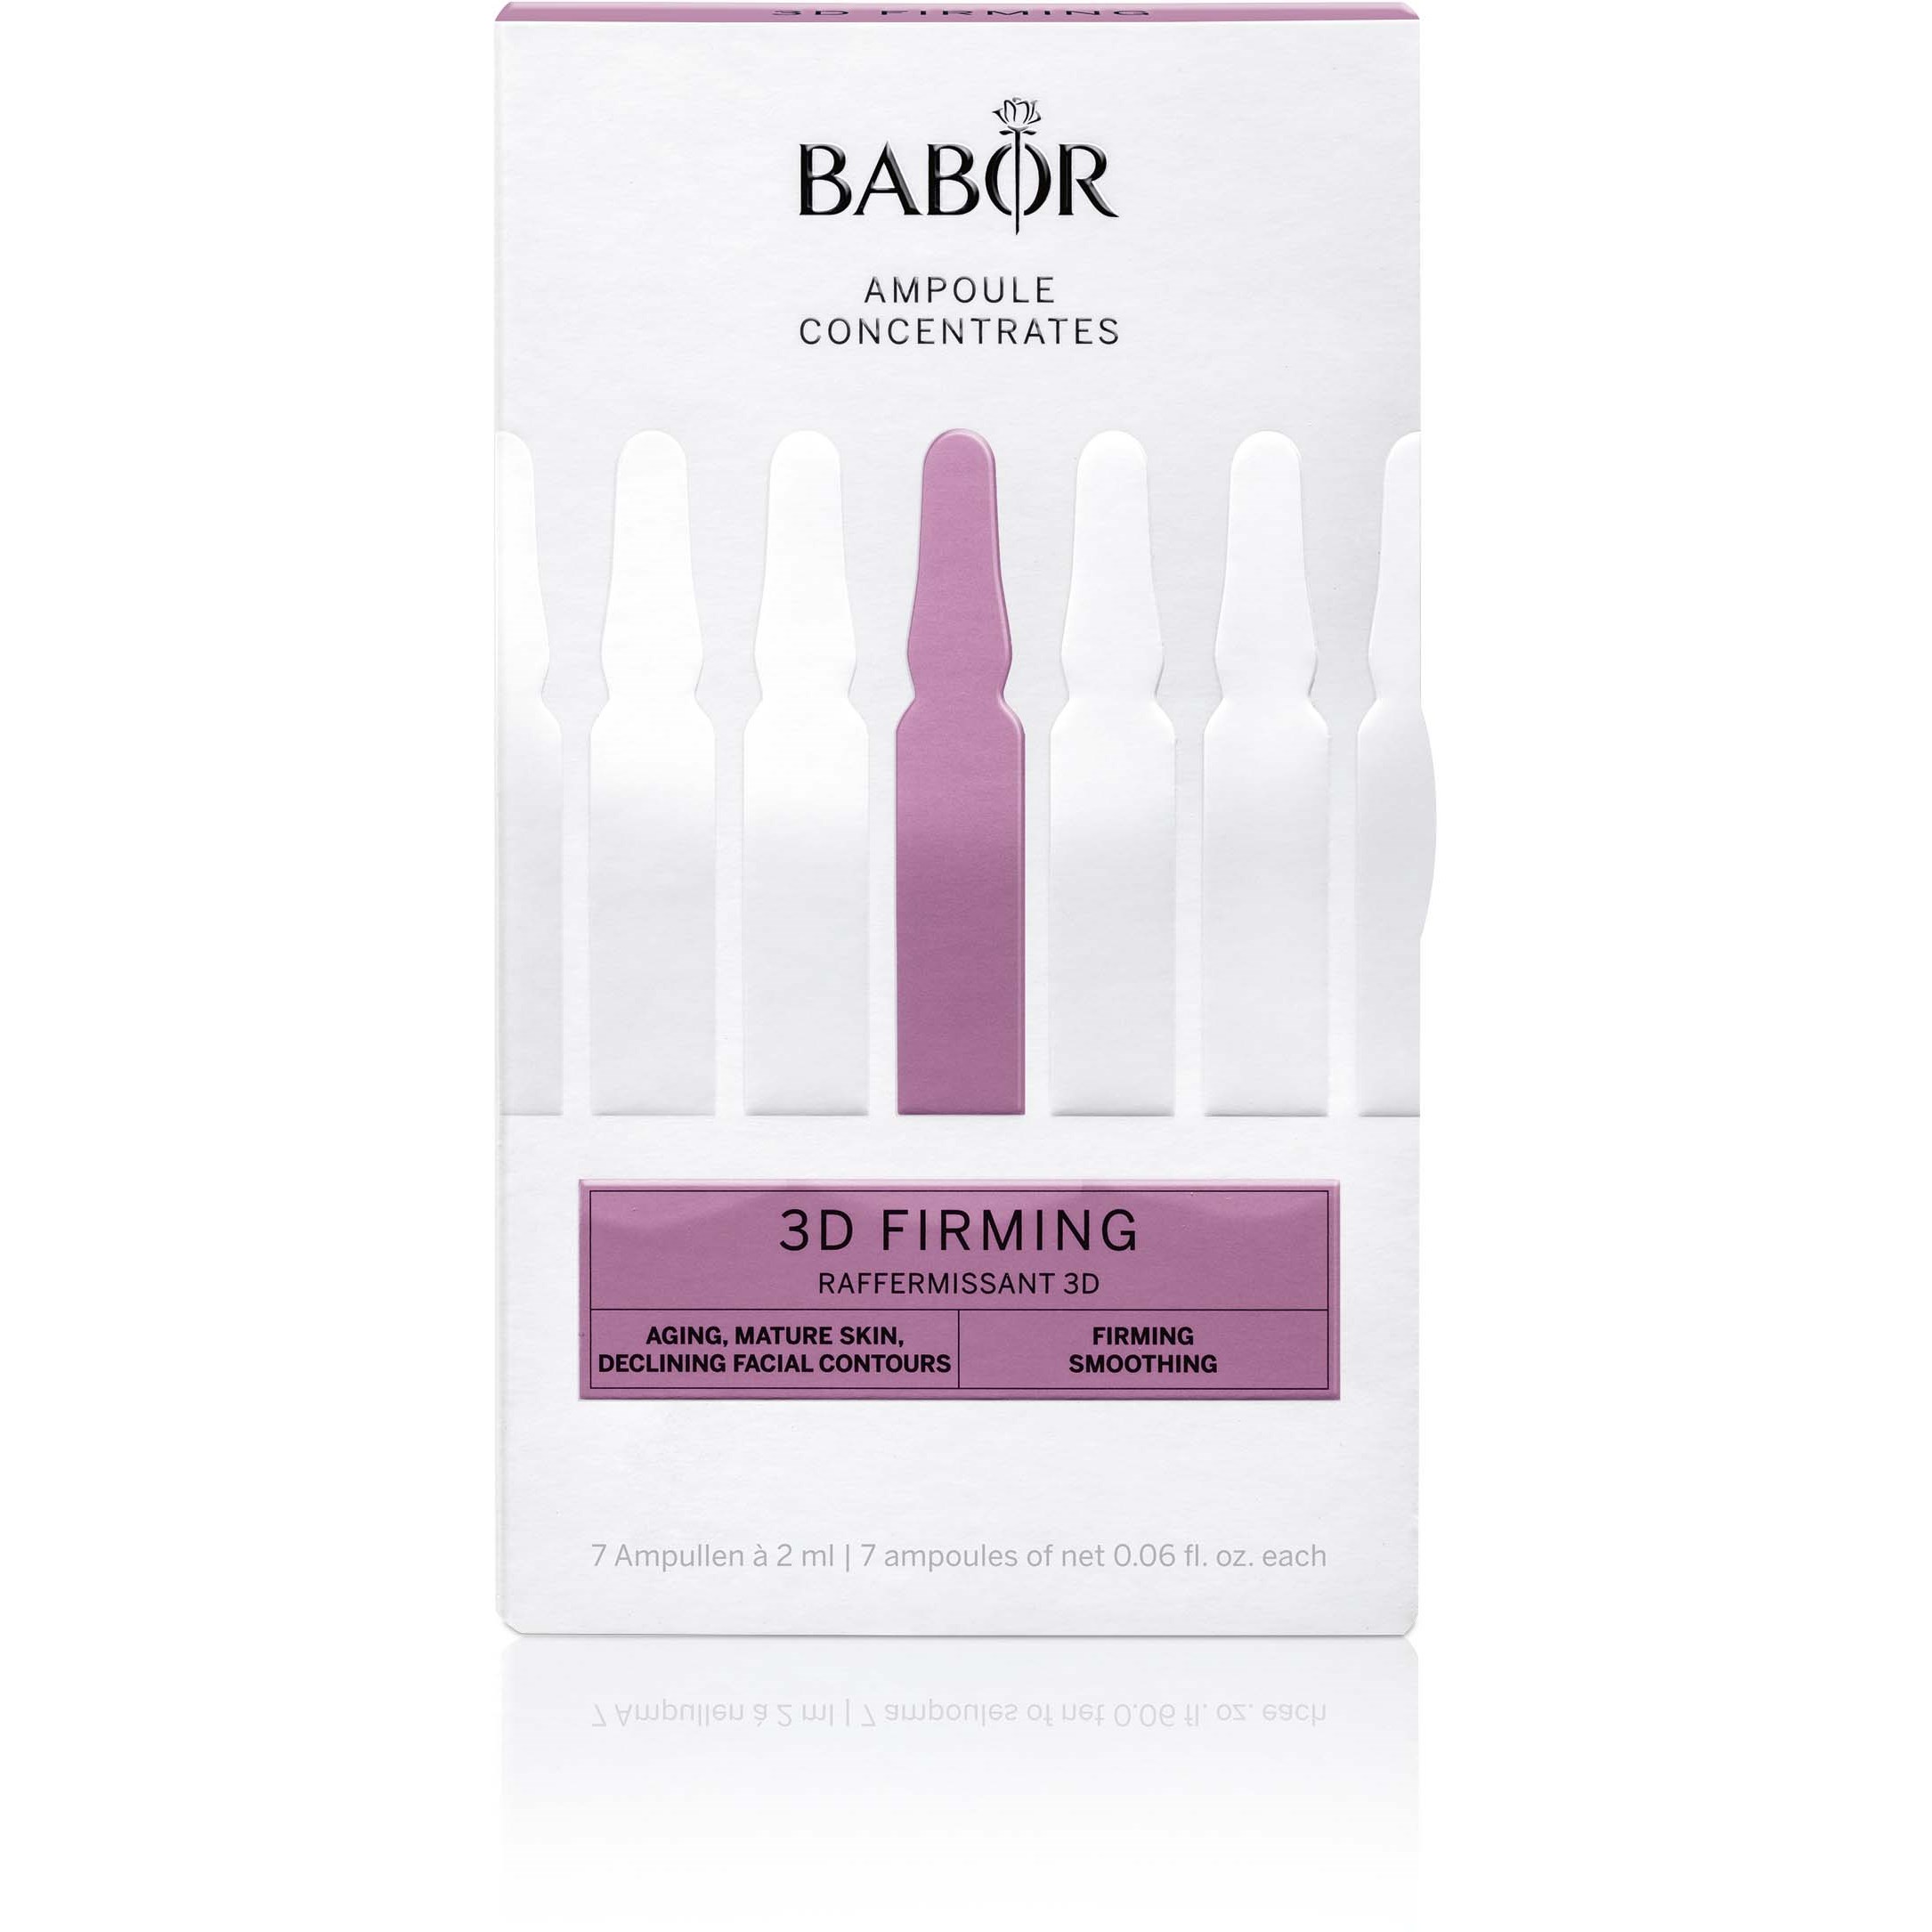 Läs mer om BABOR Ampoule Concentrates 3D Firming 14 ml